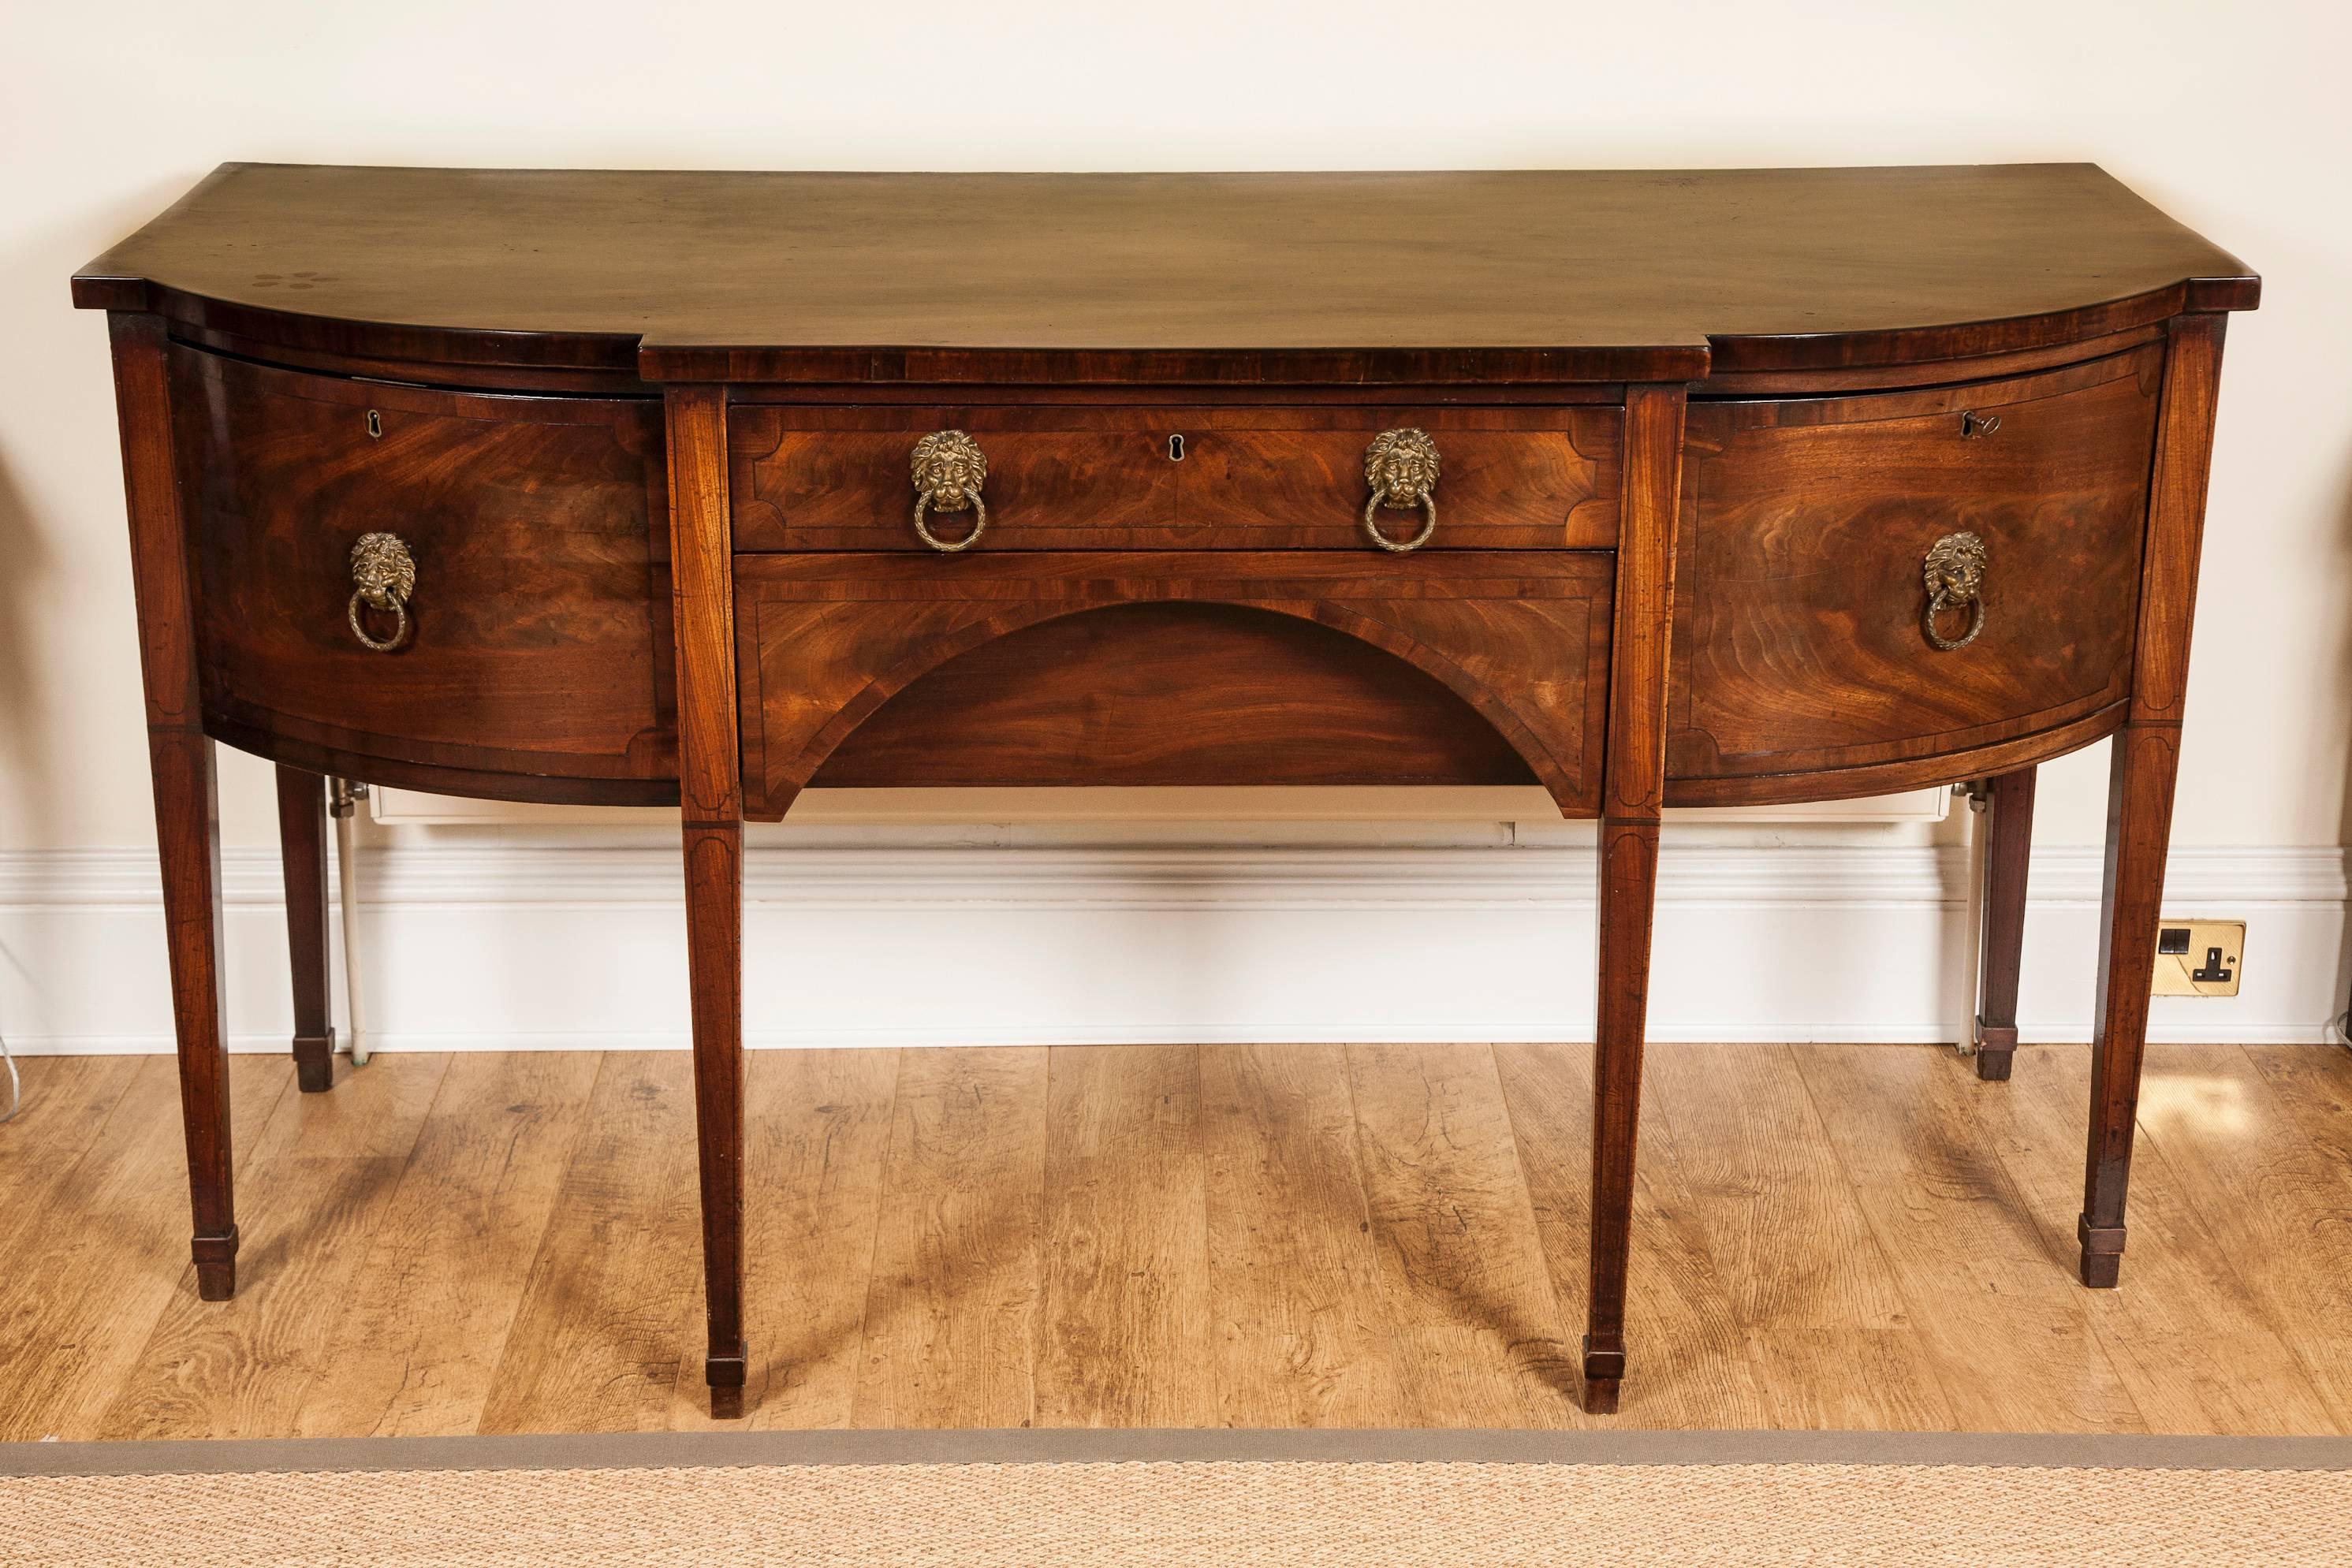 The overhanging top with bow re-entrant corners above two central and two cellarette drawers with lion mask handles, ebony stringing and mahogany crossbanding; standing on six square section tapering legs also with ebony stringing detail.
 